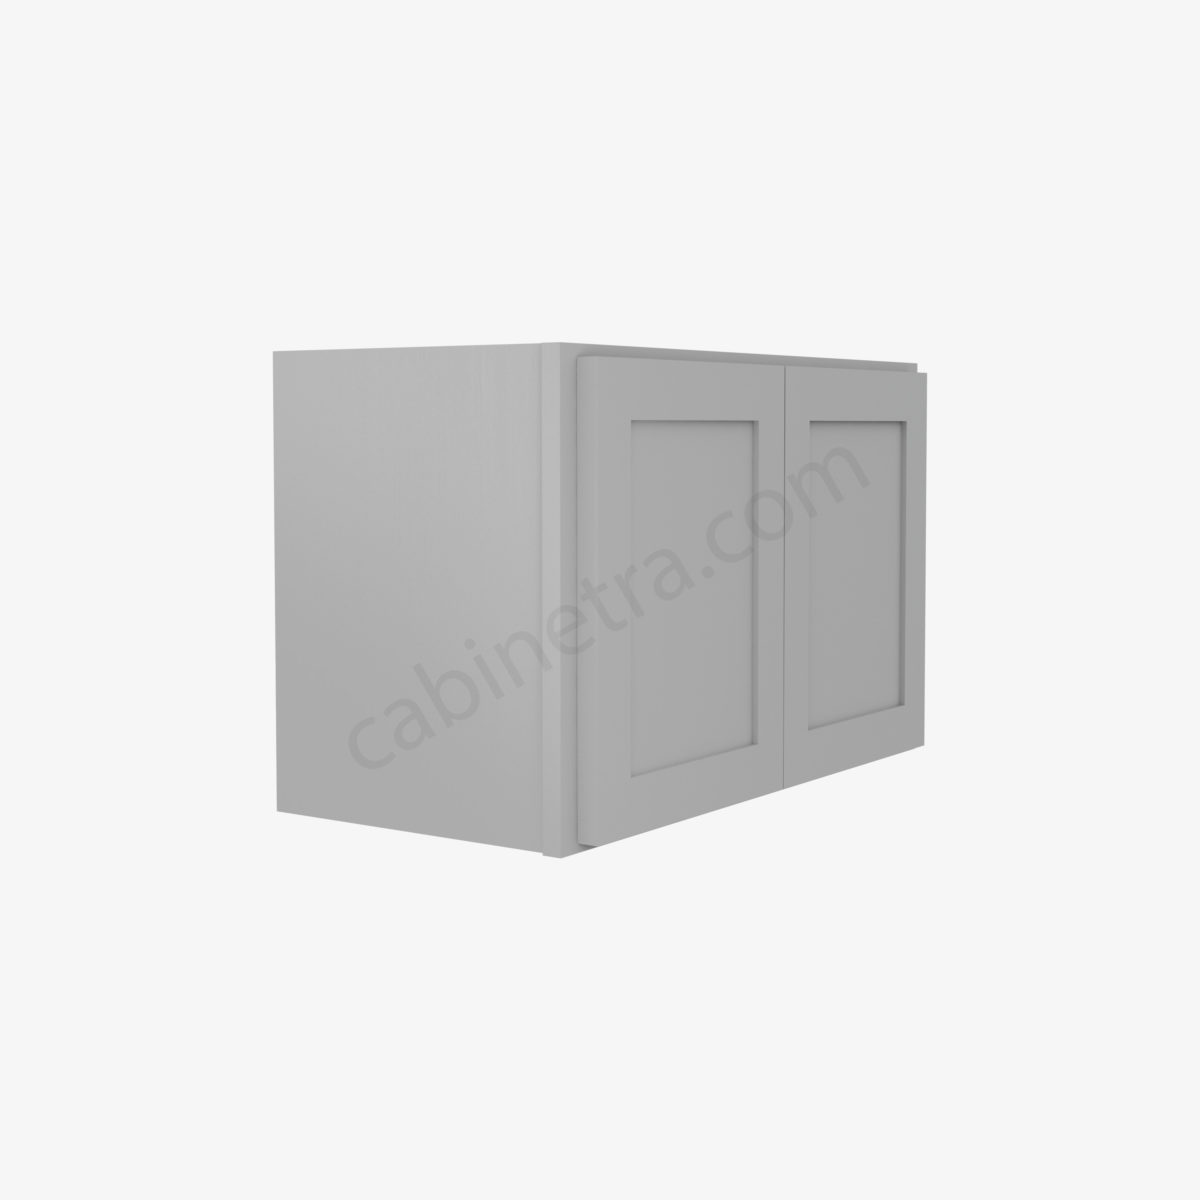 AB W2415B 4 Forevermark Lait Gray Shaker Cabinetra scaled